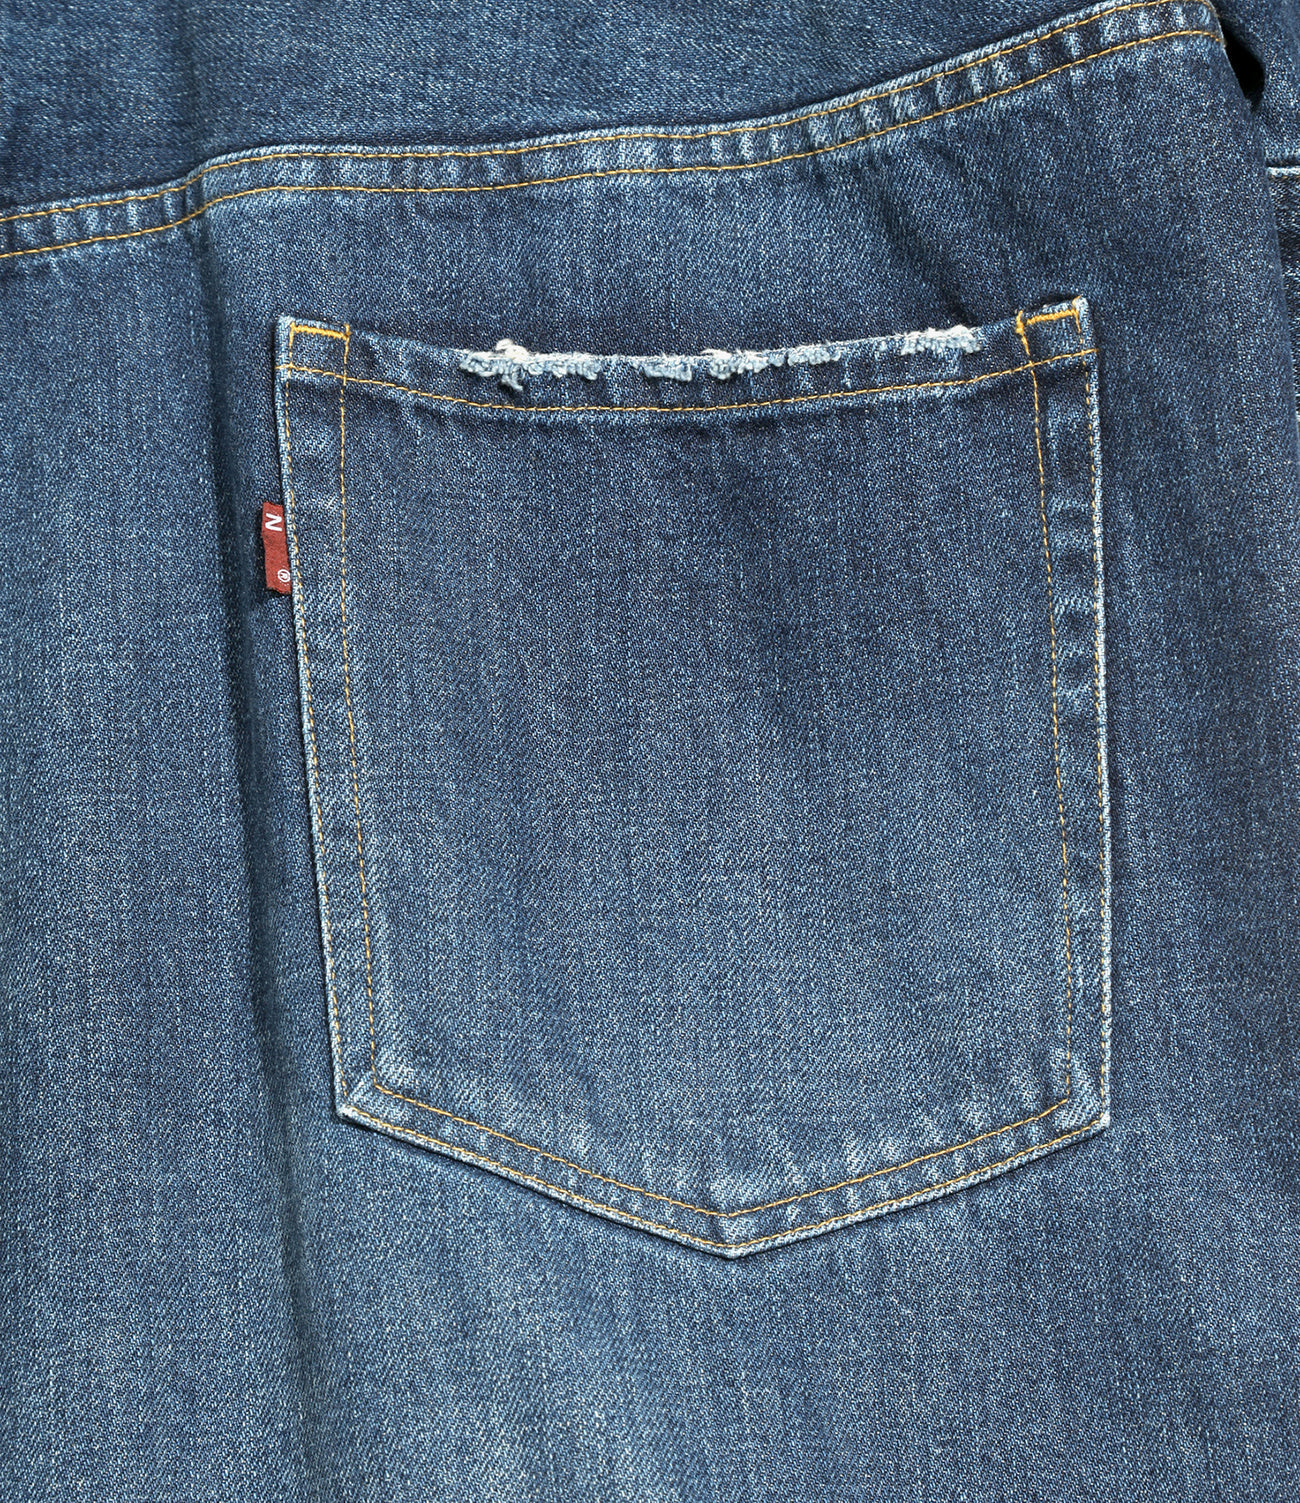 Needles H.D. ALL-IN-ONE / 12OZ DENIM